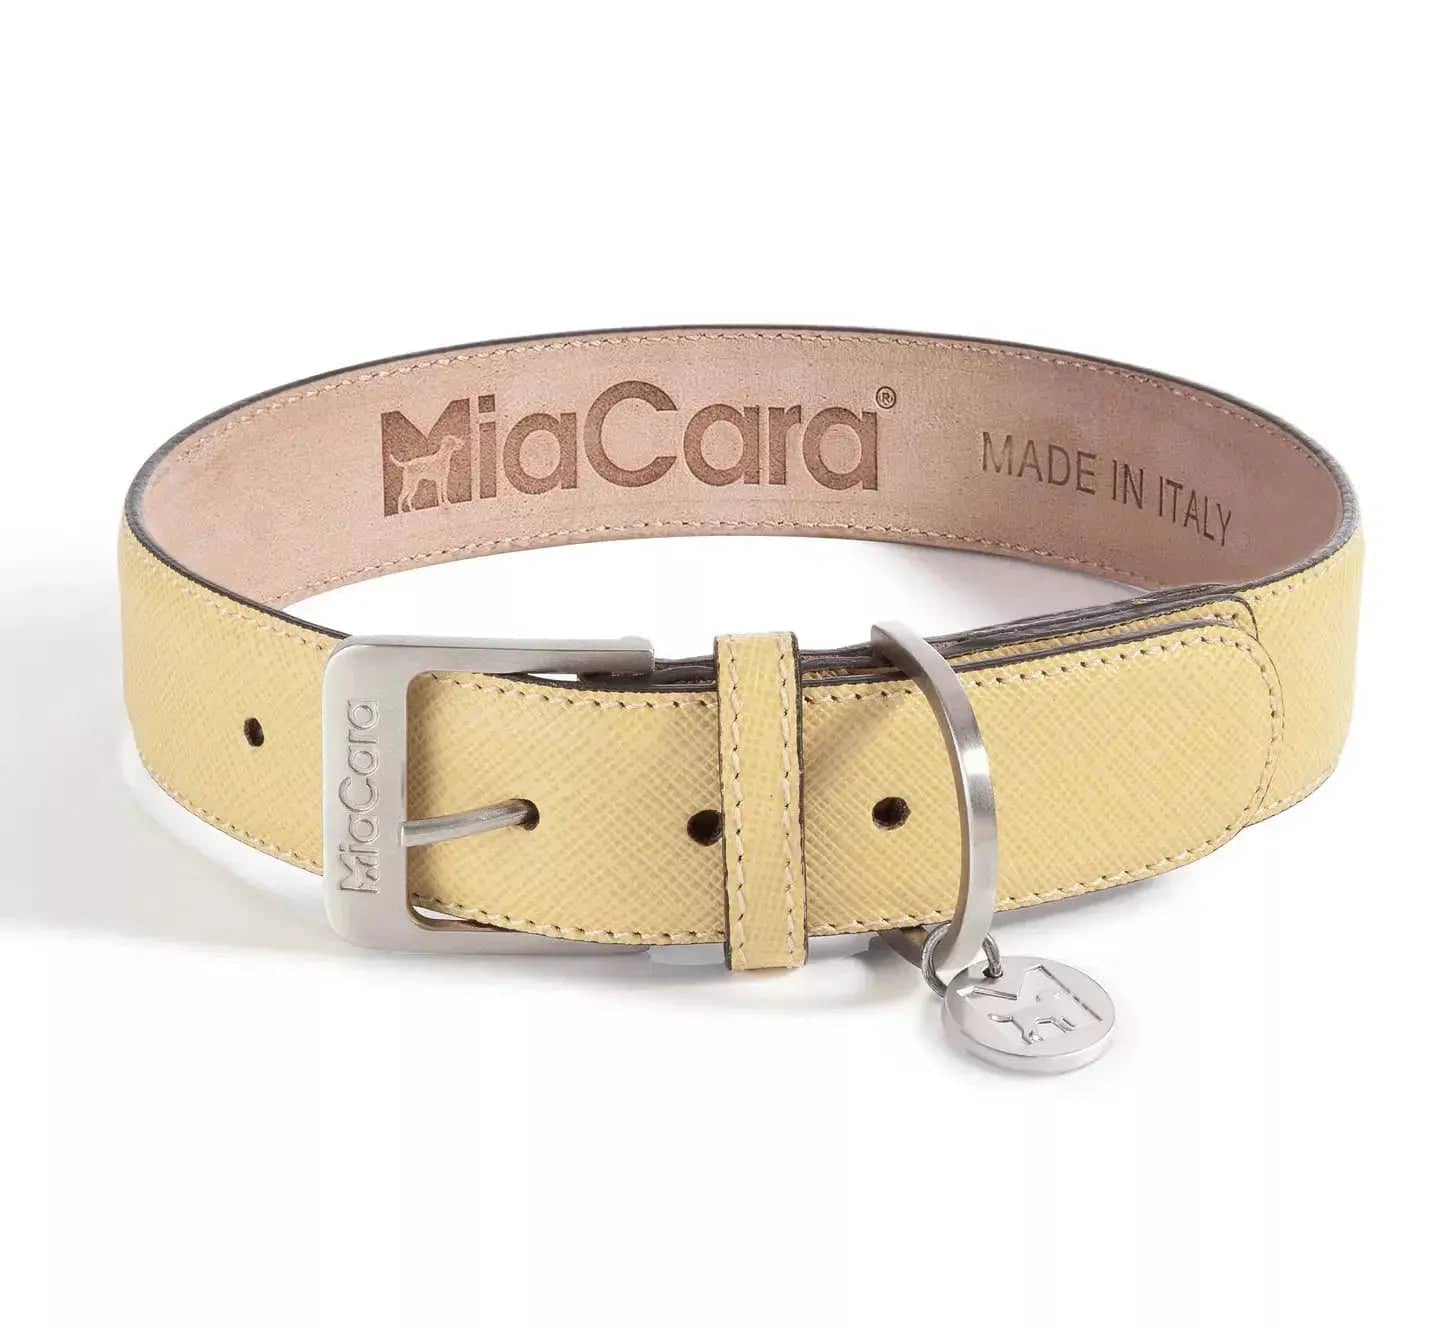 Luxurious Italian-made high quality collar for dogs